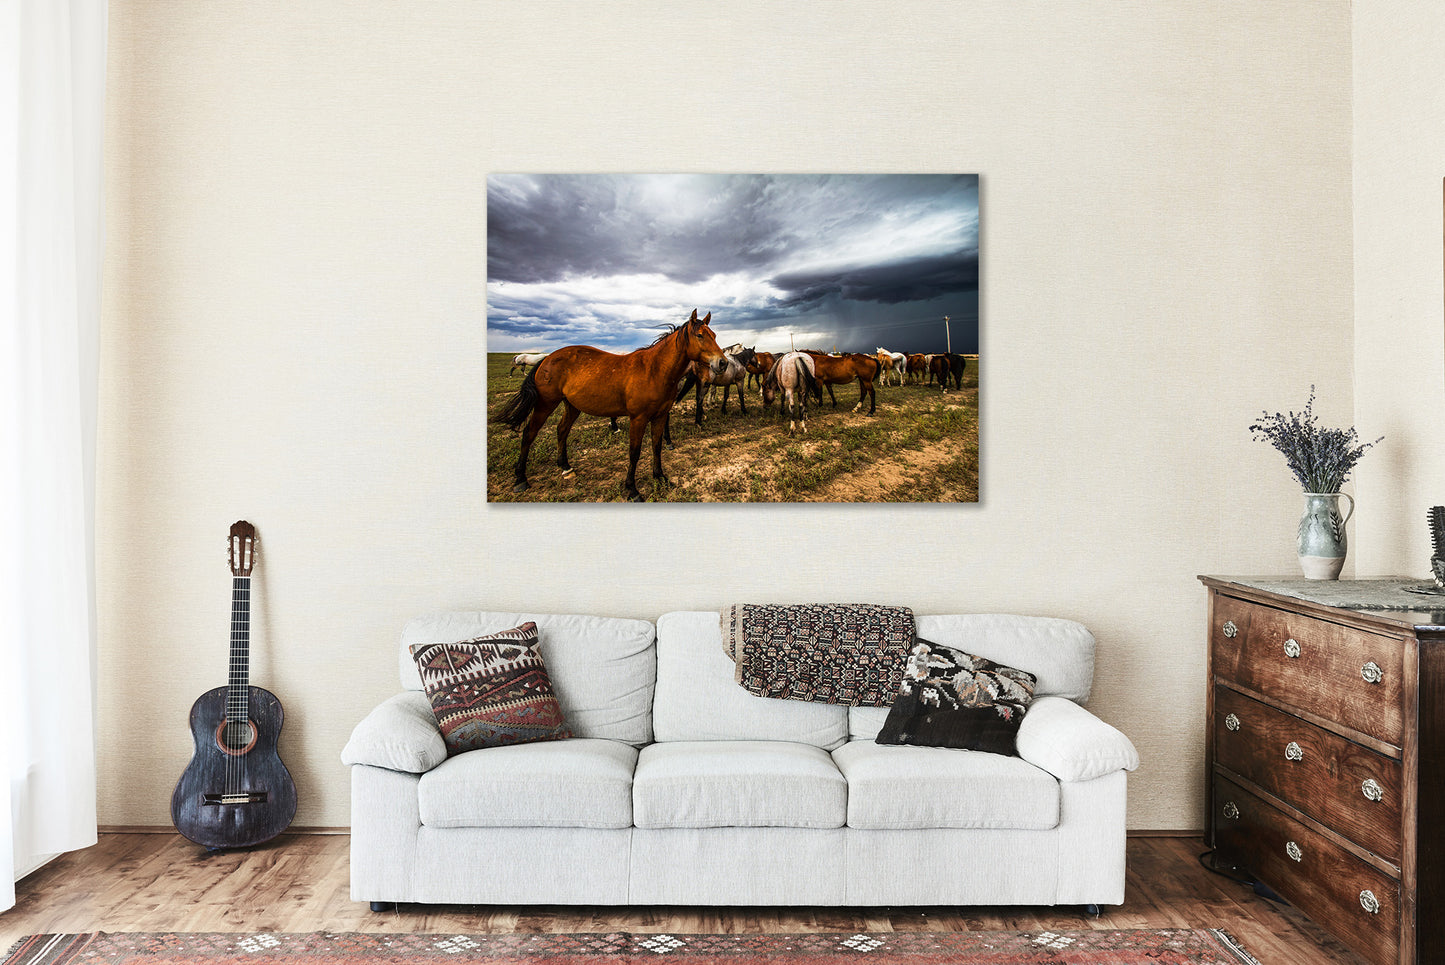 Western Canvas Wall Art - Gallery Wrap of Horse Watching Over Herd on Stormy Day in Oklahoma - Farm Ranch Photography Artwork Photo Decor